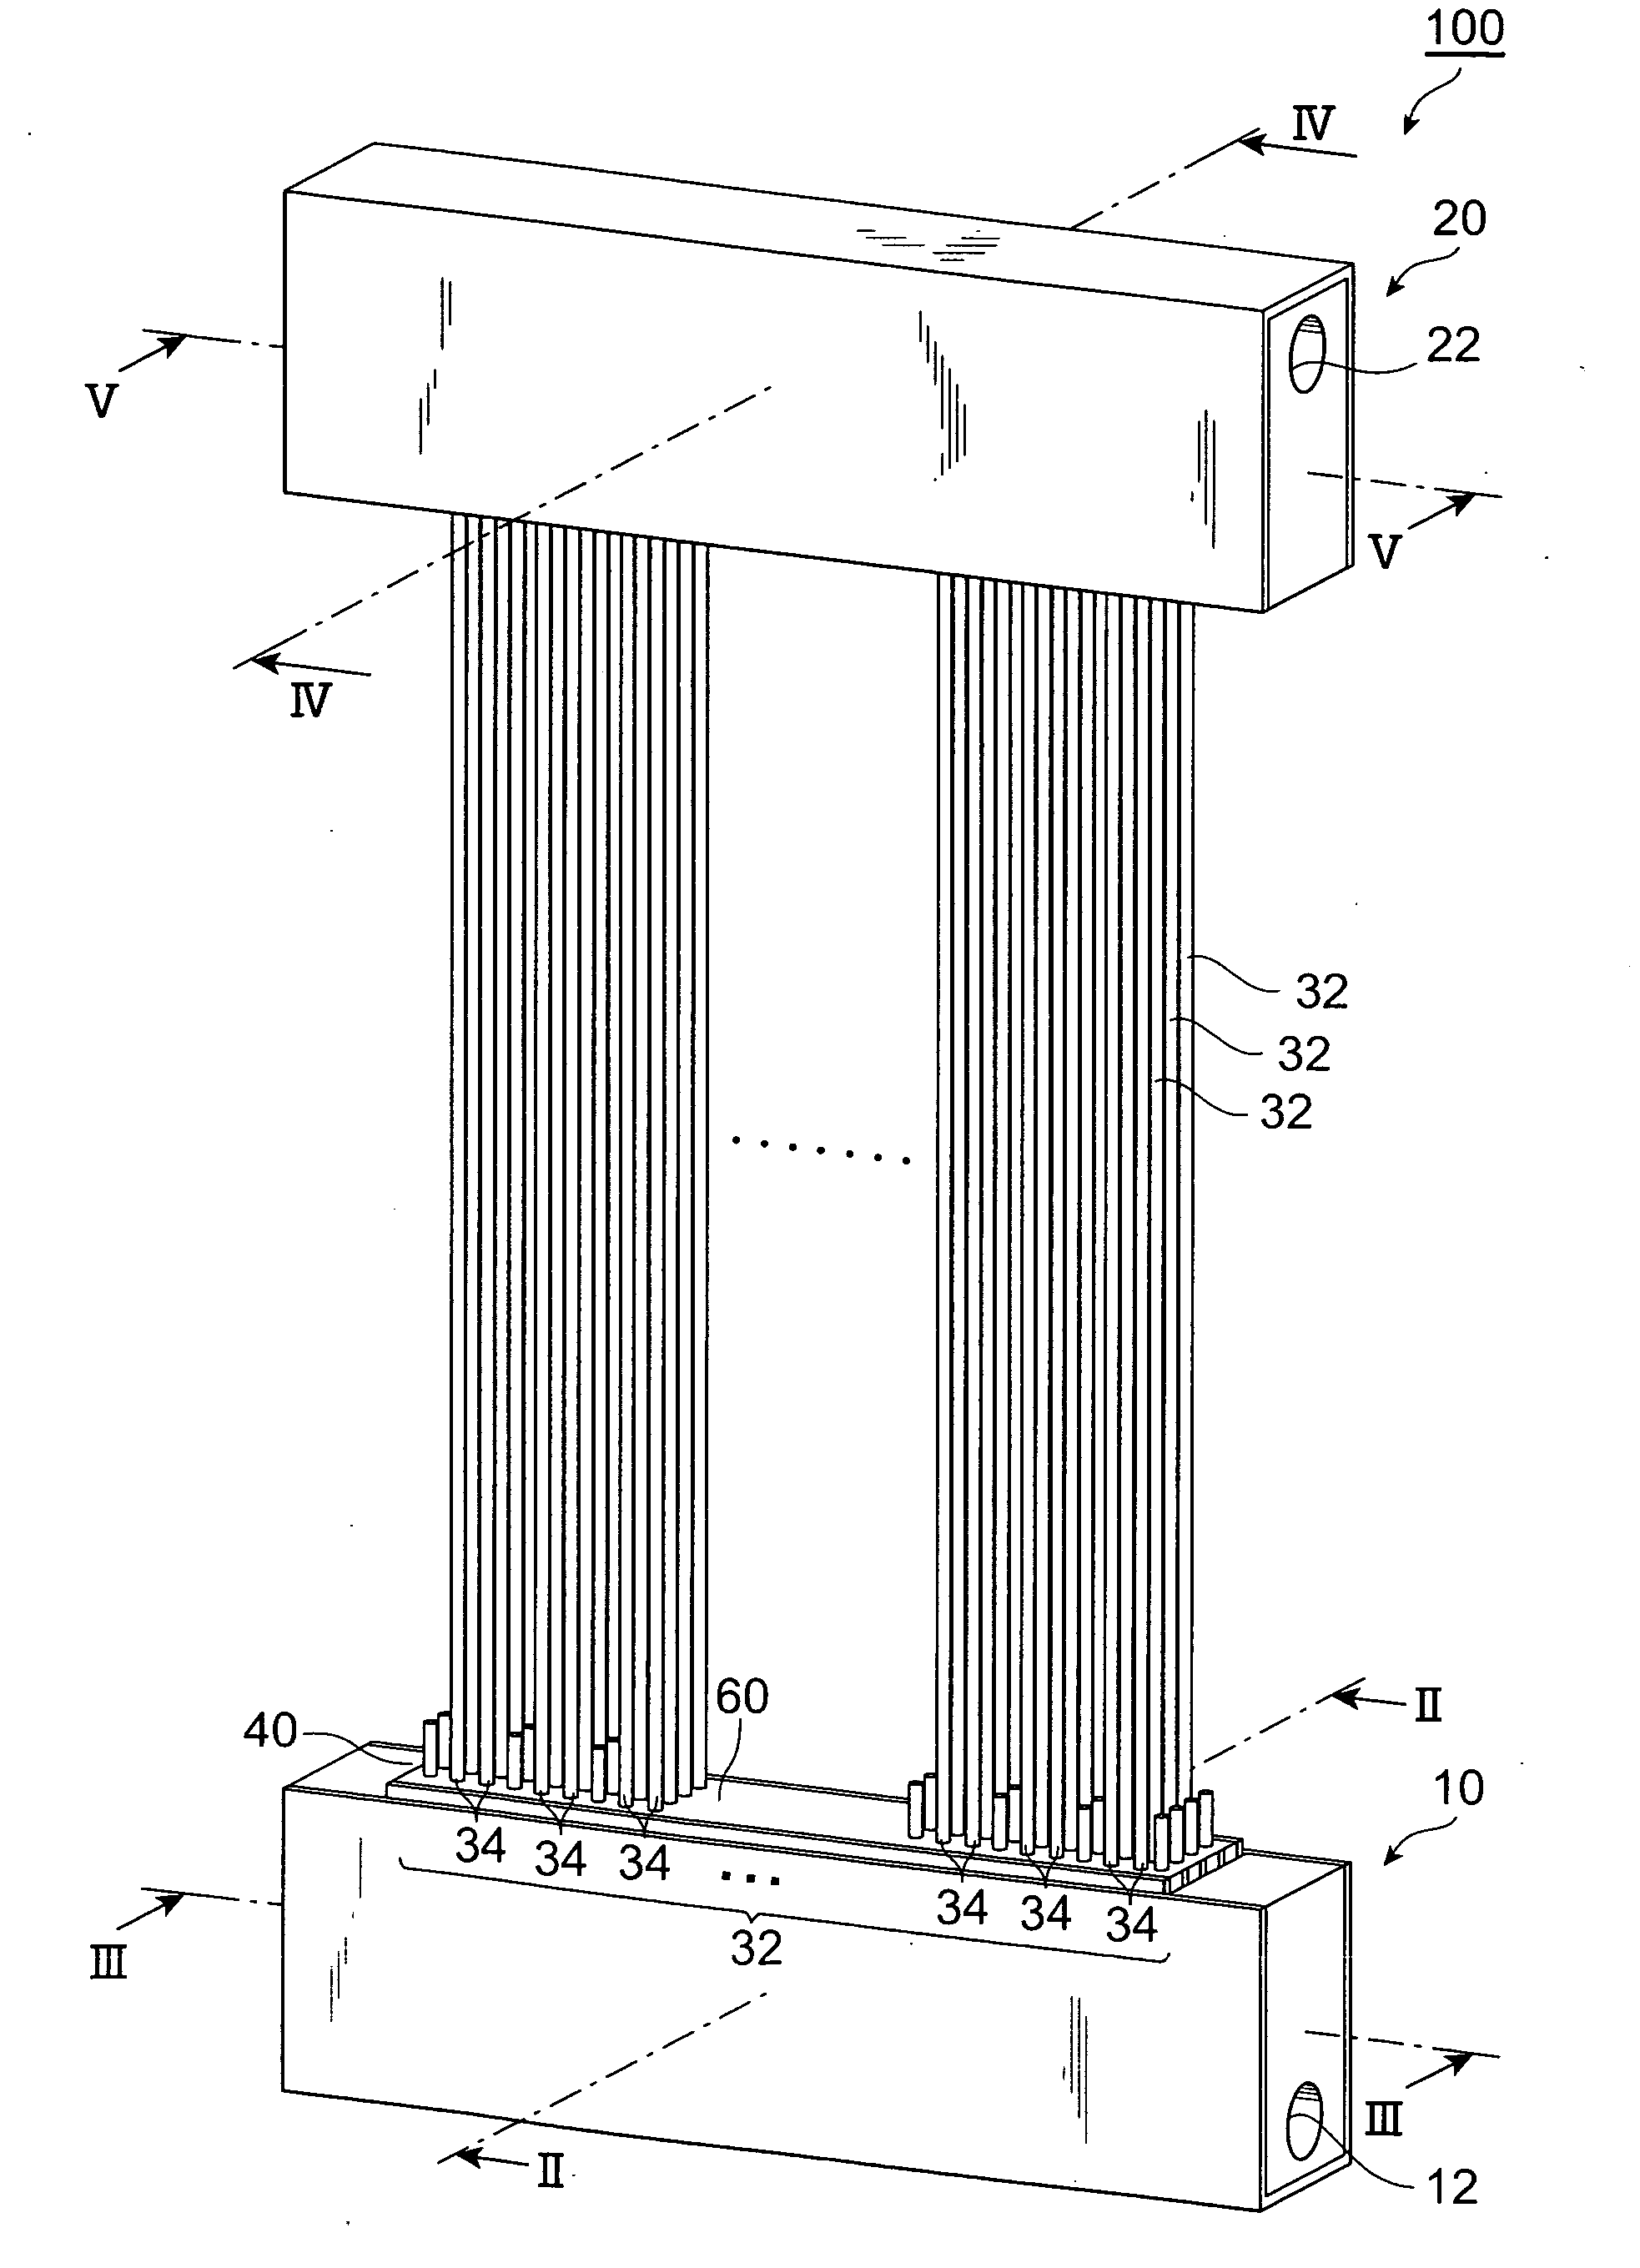 Hollow-Fiber Module and Process for Producing The Same